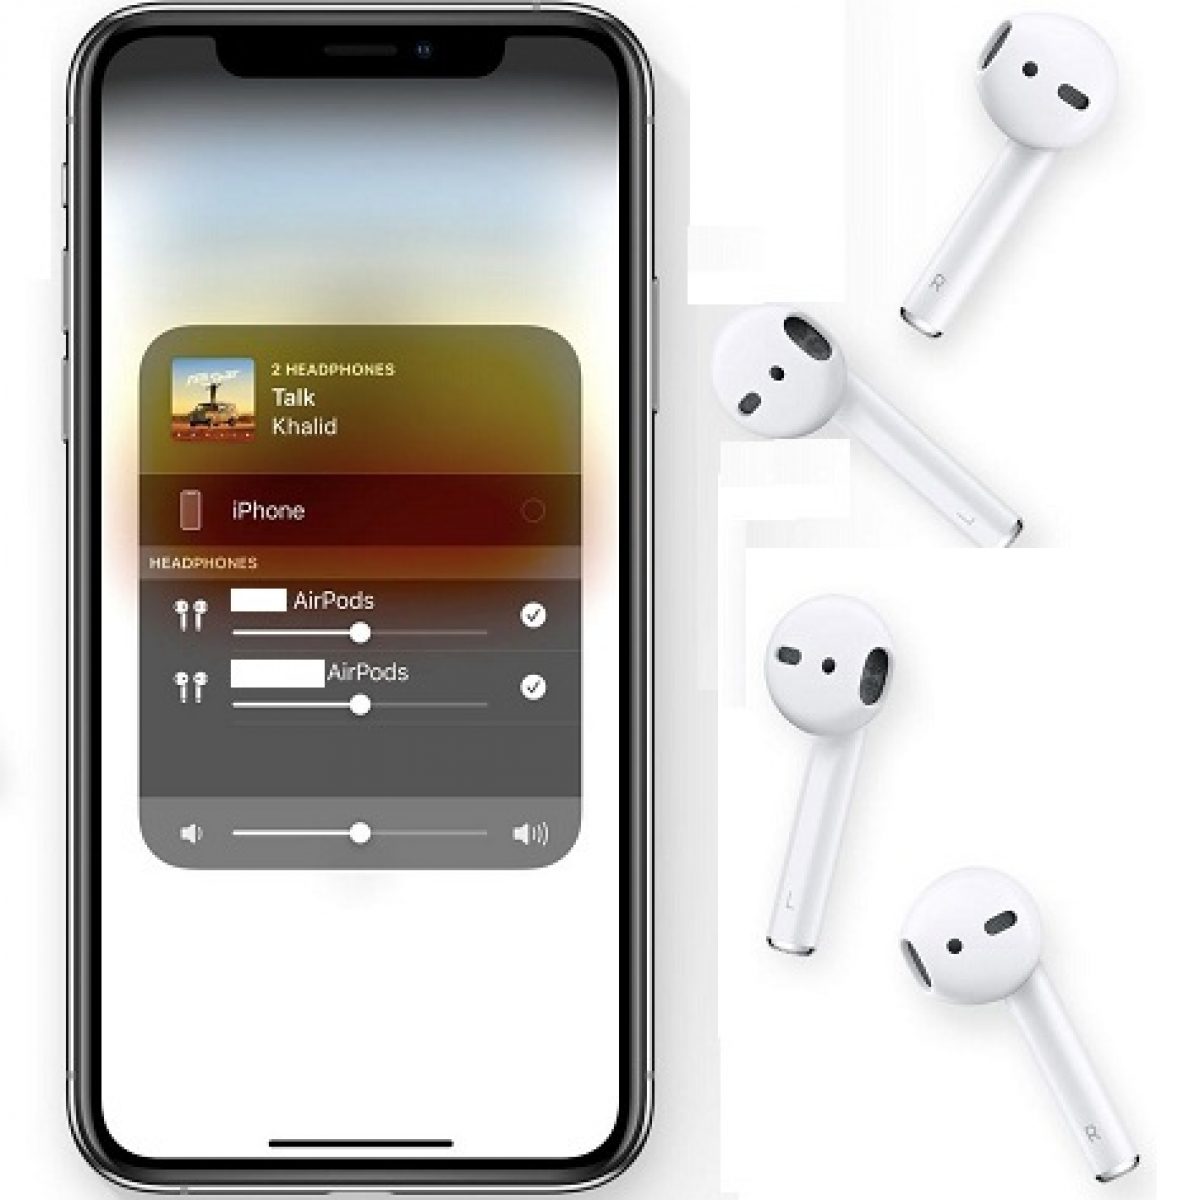 postkontor Allieret Blossom How To Pair Two AirPods To The Same iPhone, iPad or Mac